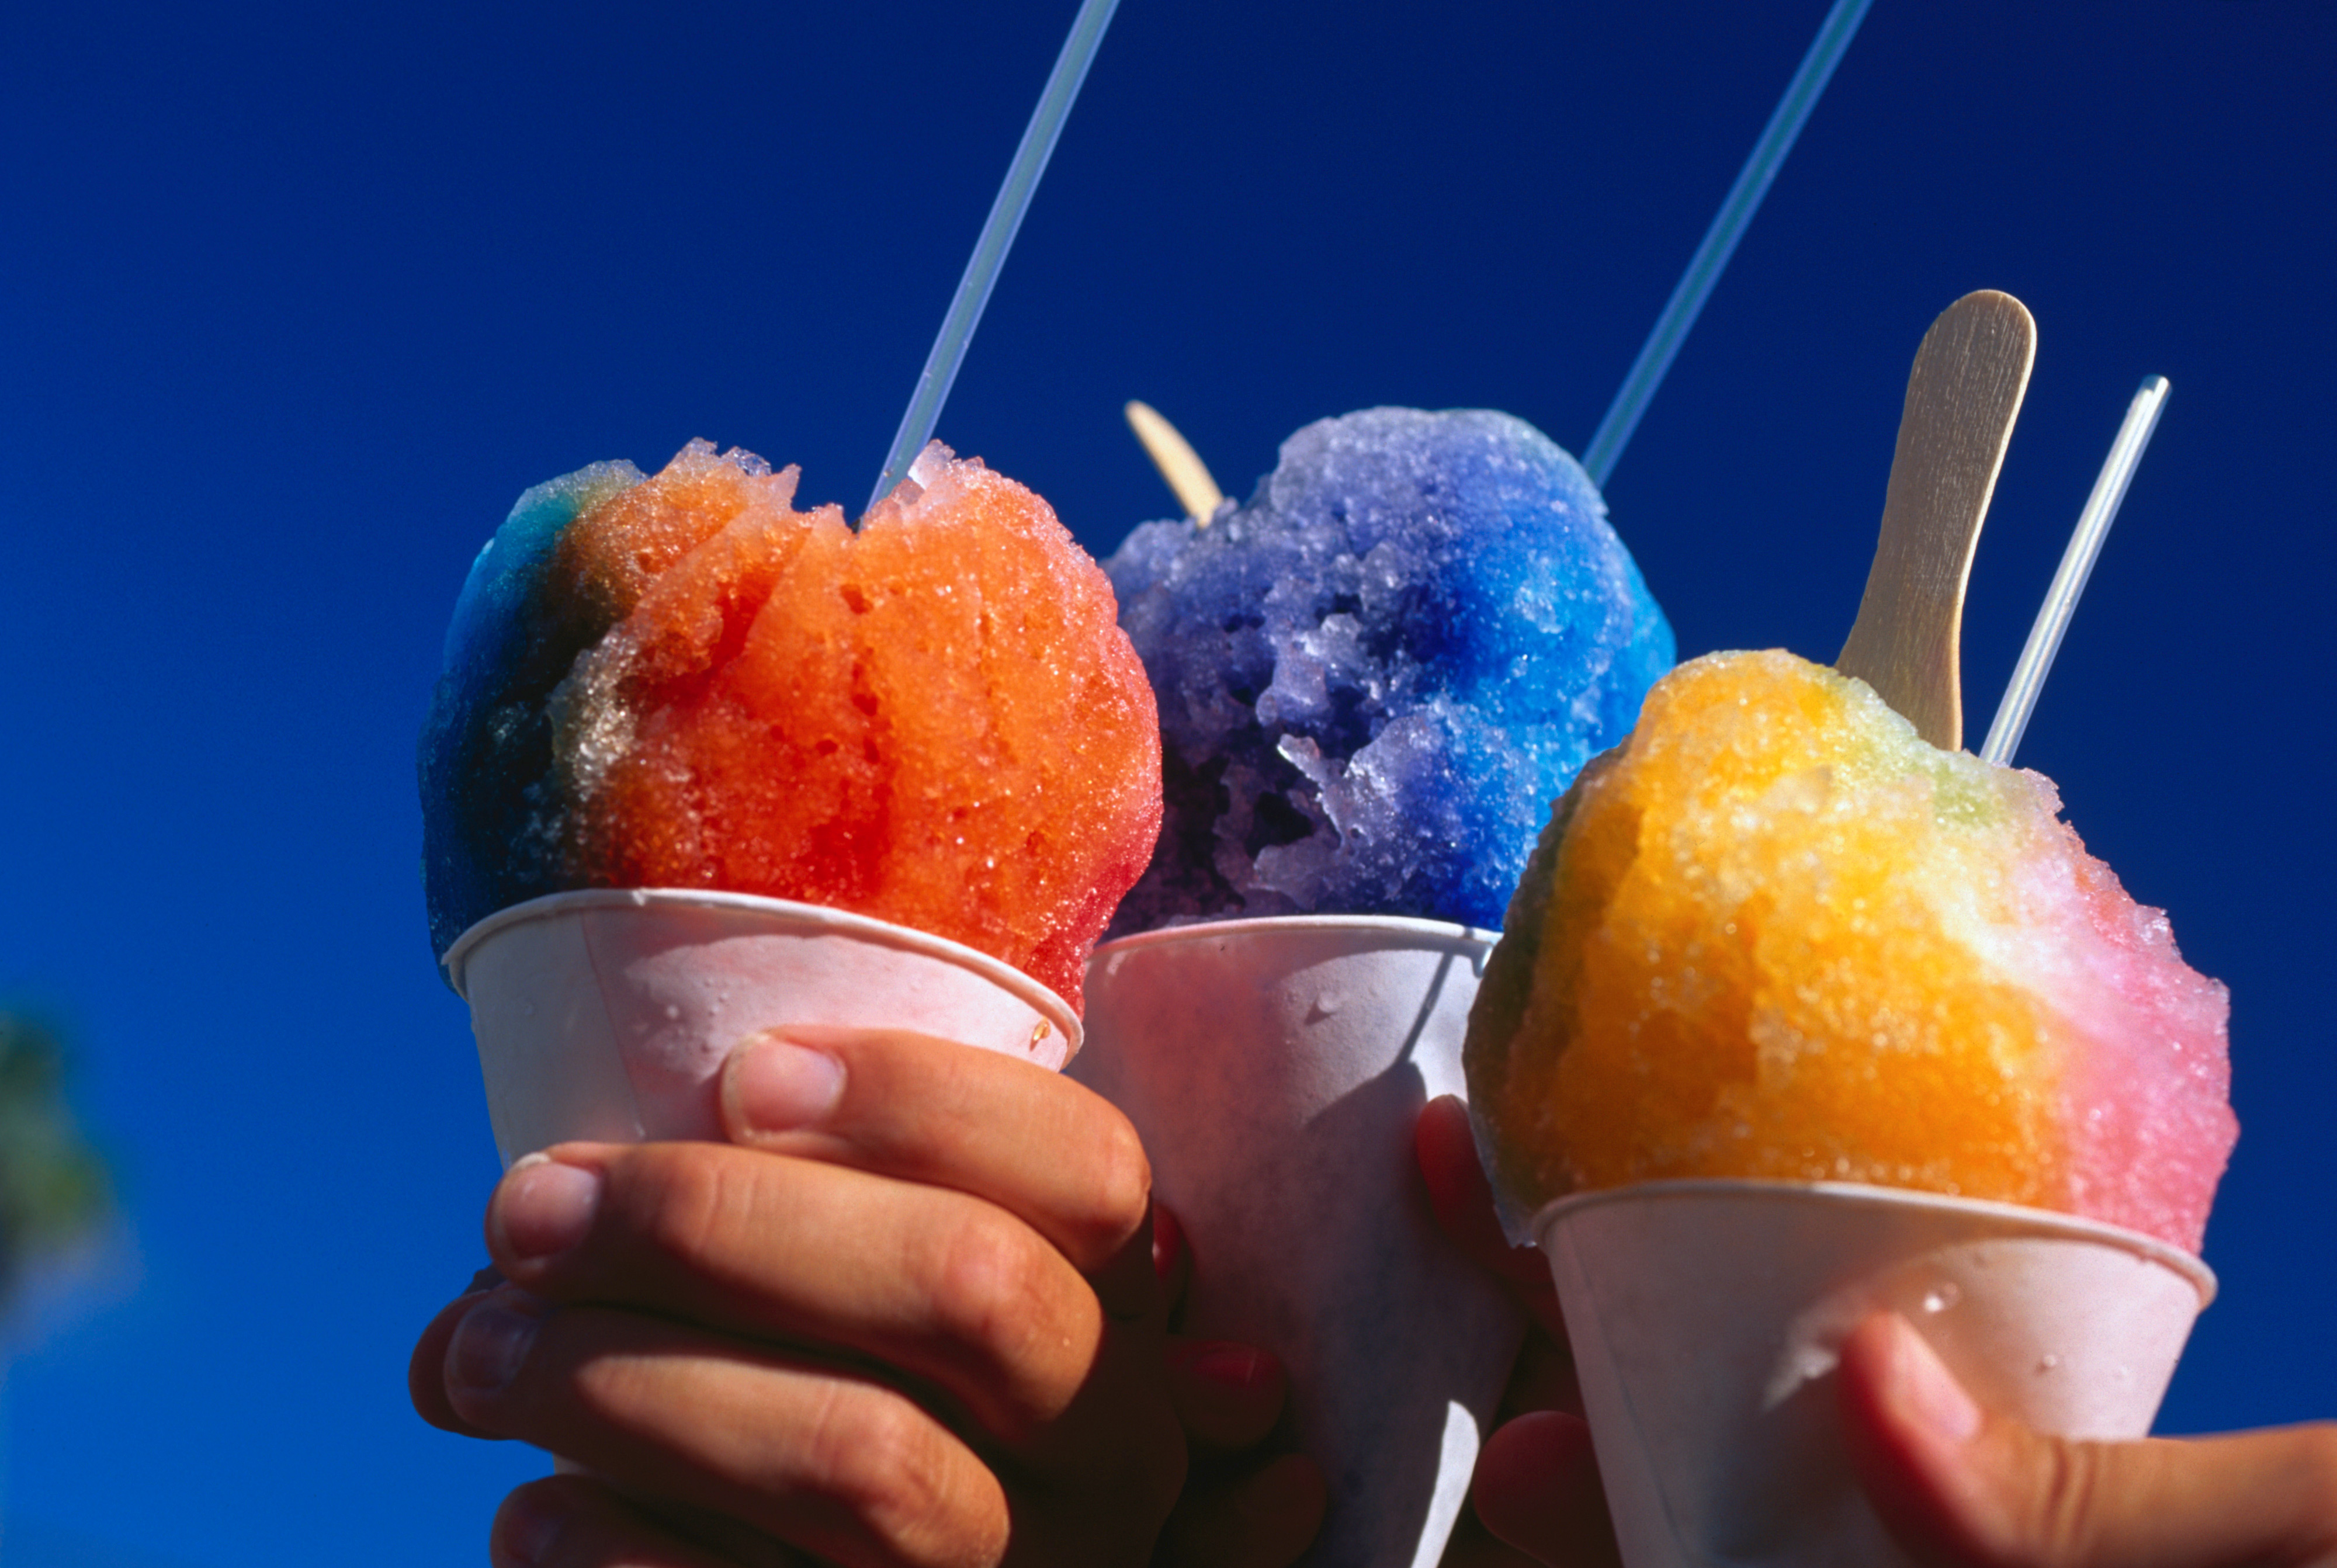 Shave ice is the perfect way to cool off after a long day of outdoor adventures in Kauaʻi. Image by Ann Cecil / Lonely Planet Images / Getty